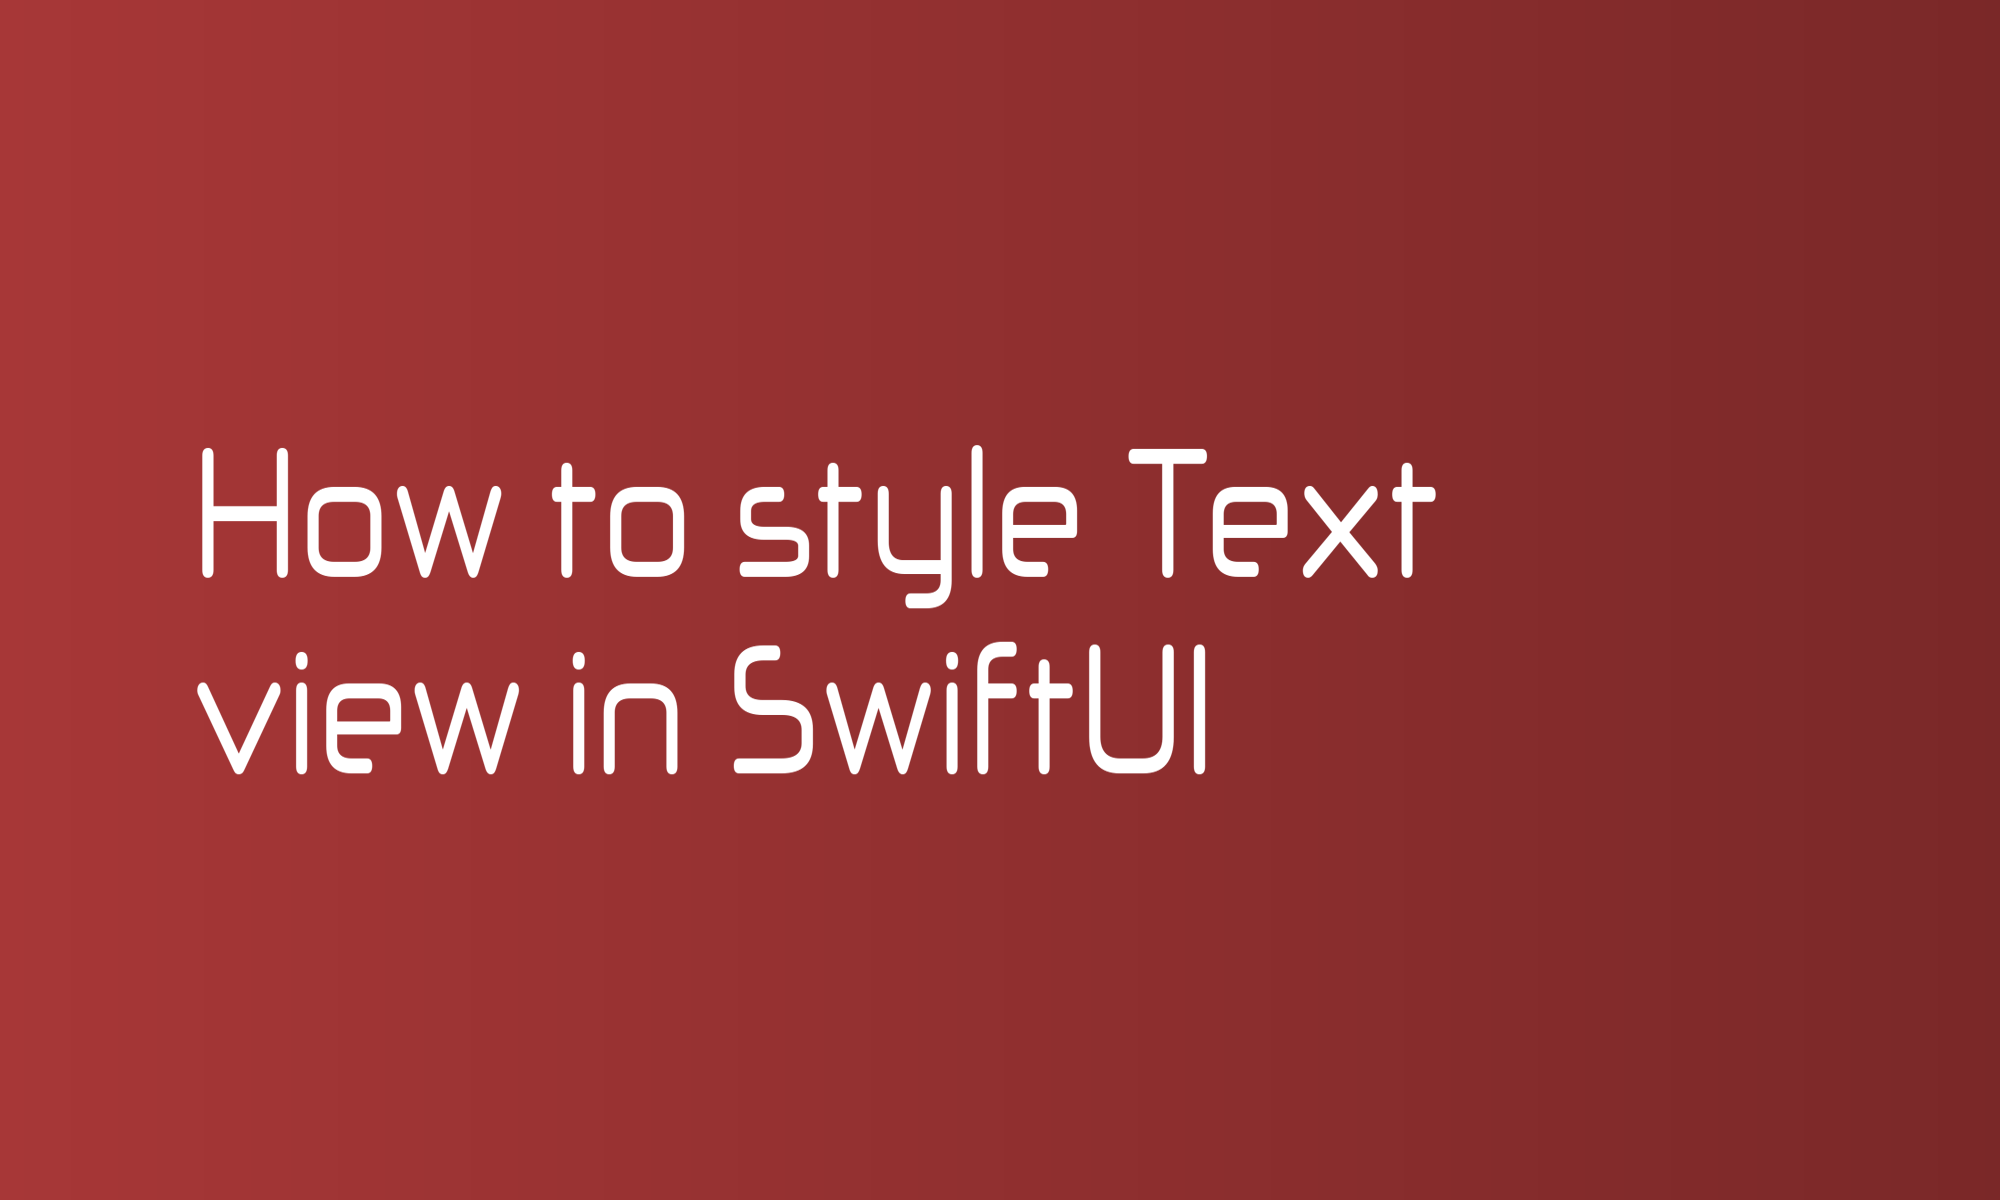 How to style Text view in SwiftUI